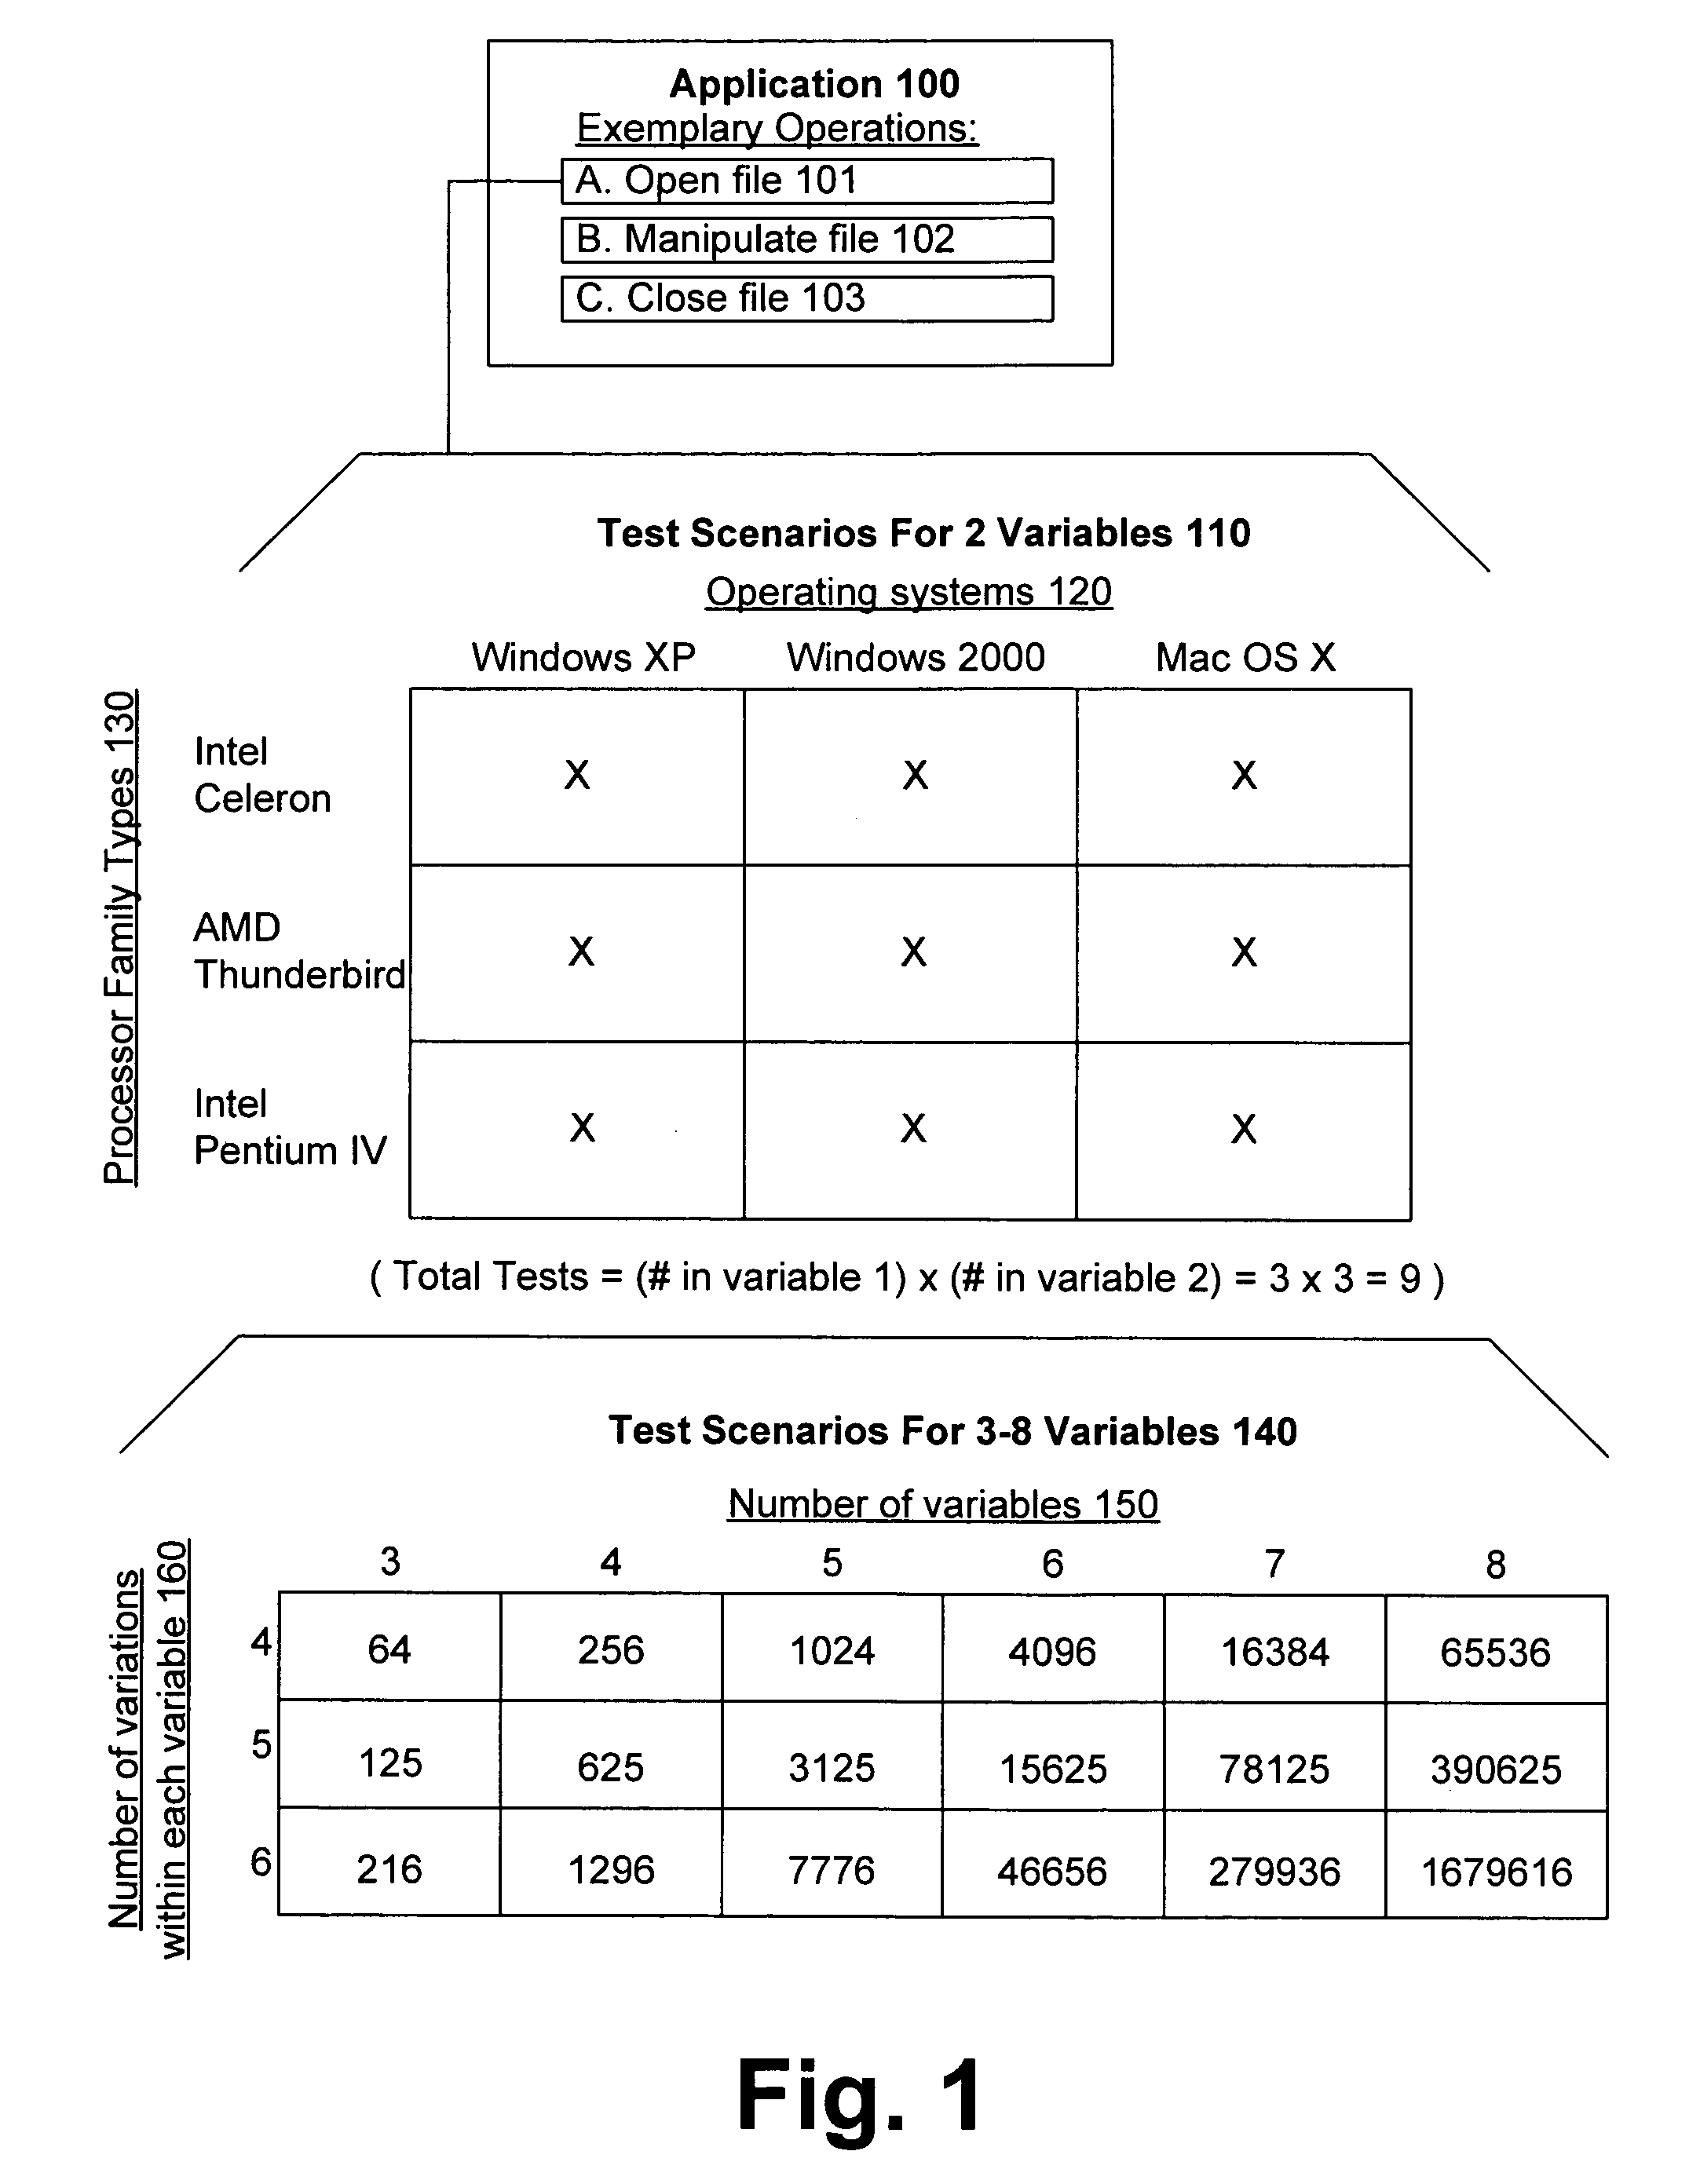 Systems and methods for automated classification and analysis of large volumes of test result data